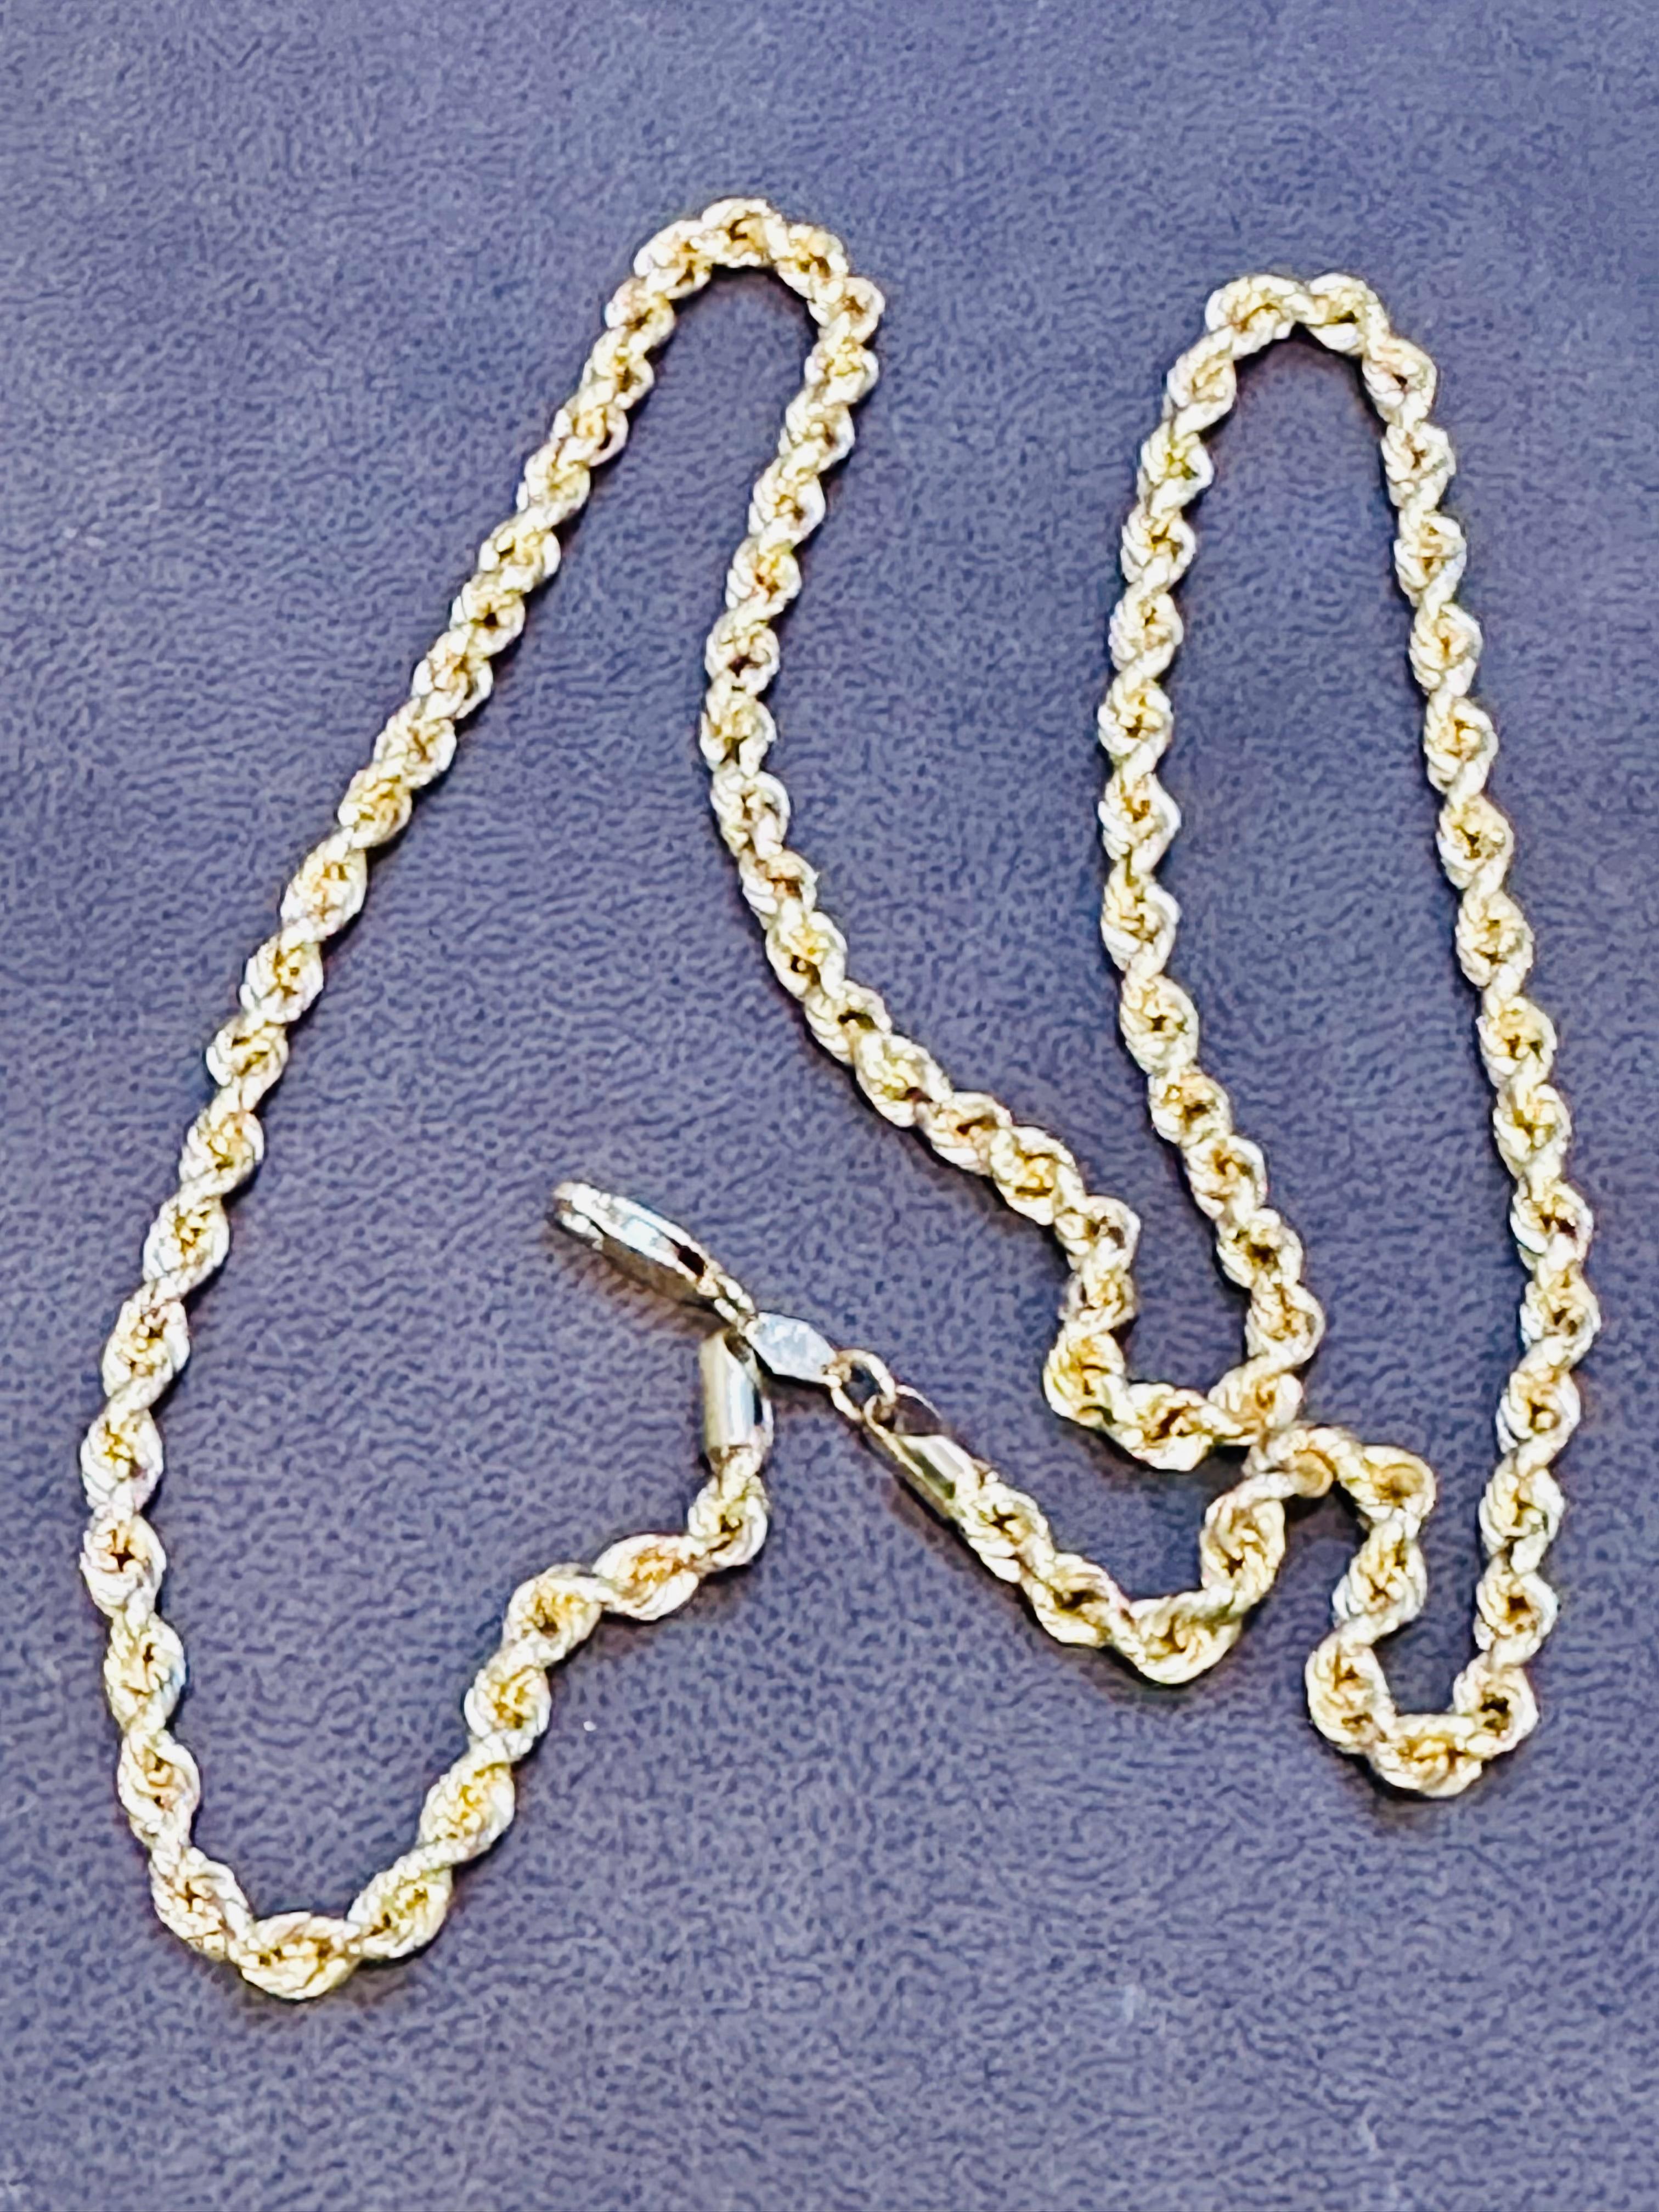 Vintage 14 Karat Yellow Gold 8.3 Gm, Rope Chain Necklace For Sale 7